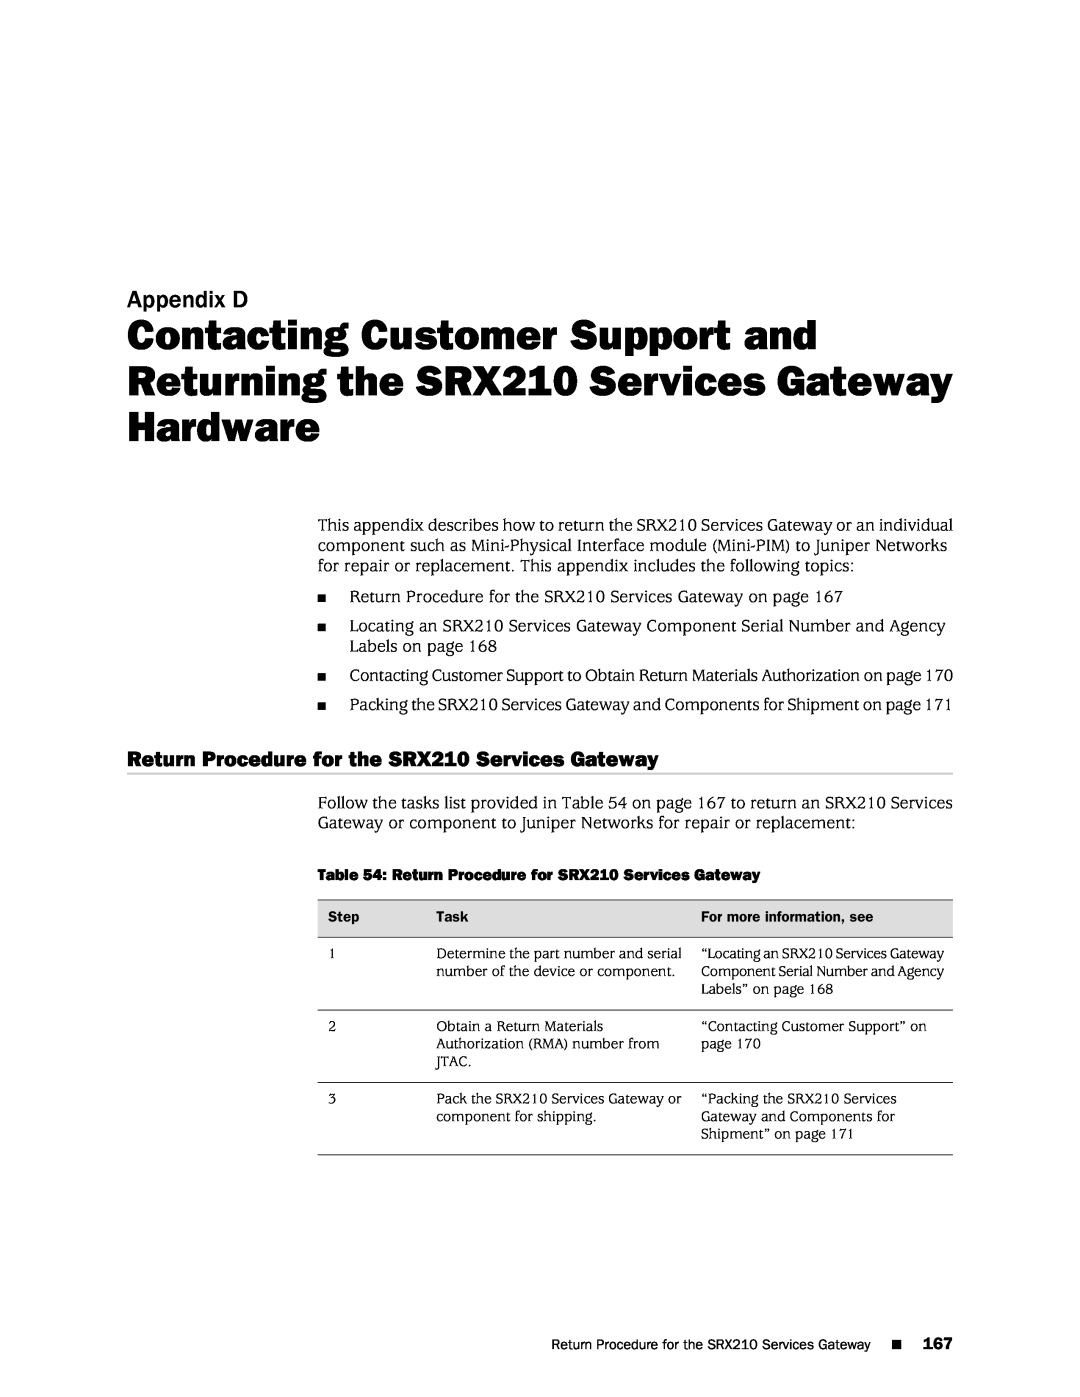 Juniper Networks SRX 210 manual Contacting Customer Support and Returning the SRX210 Services Gateway, Hardware, Appendix D 